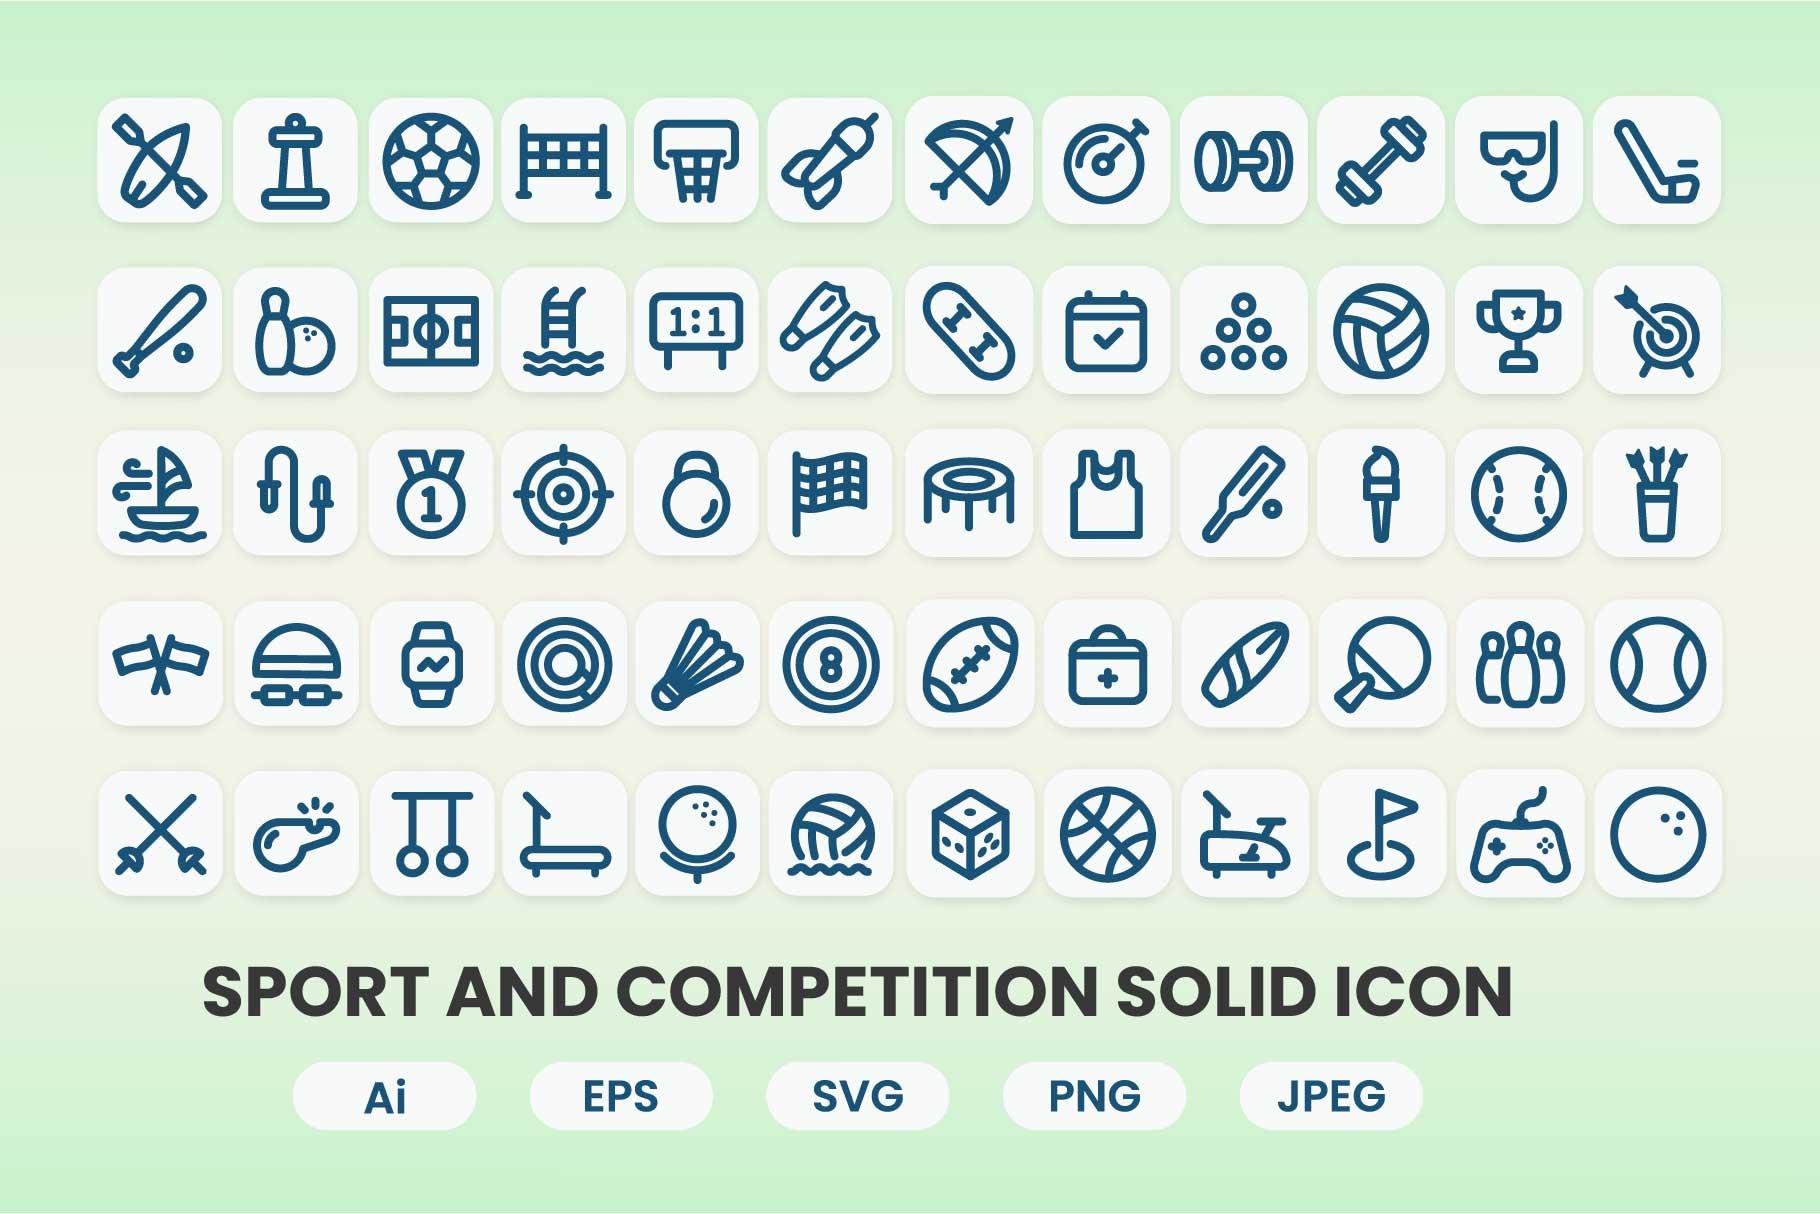 Sport and Competition Outline Icon cover image.